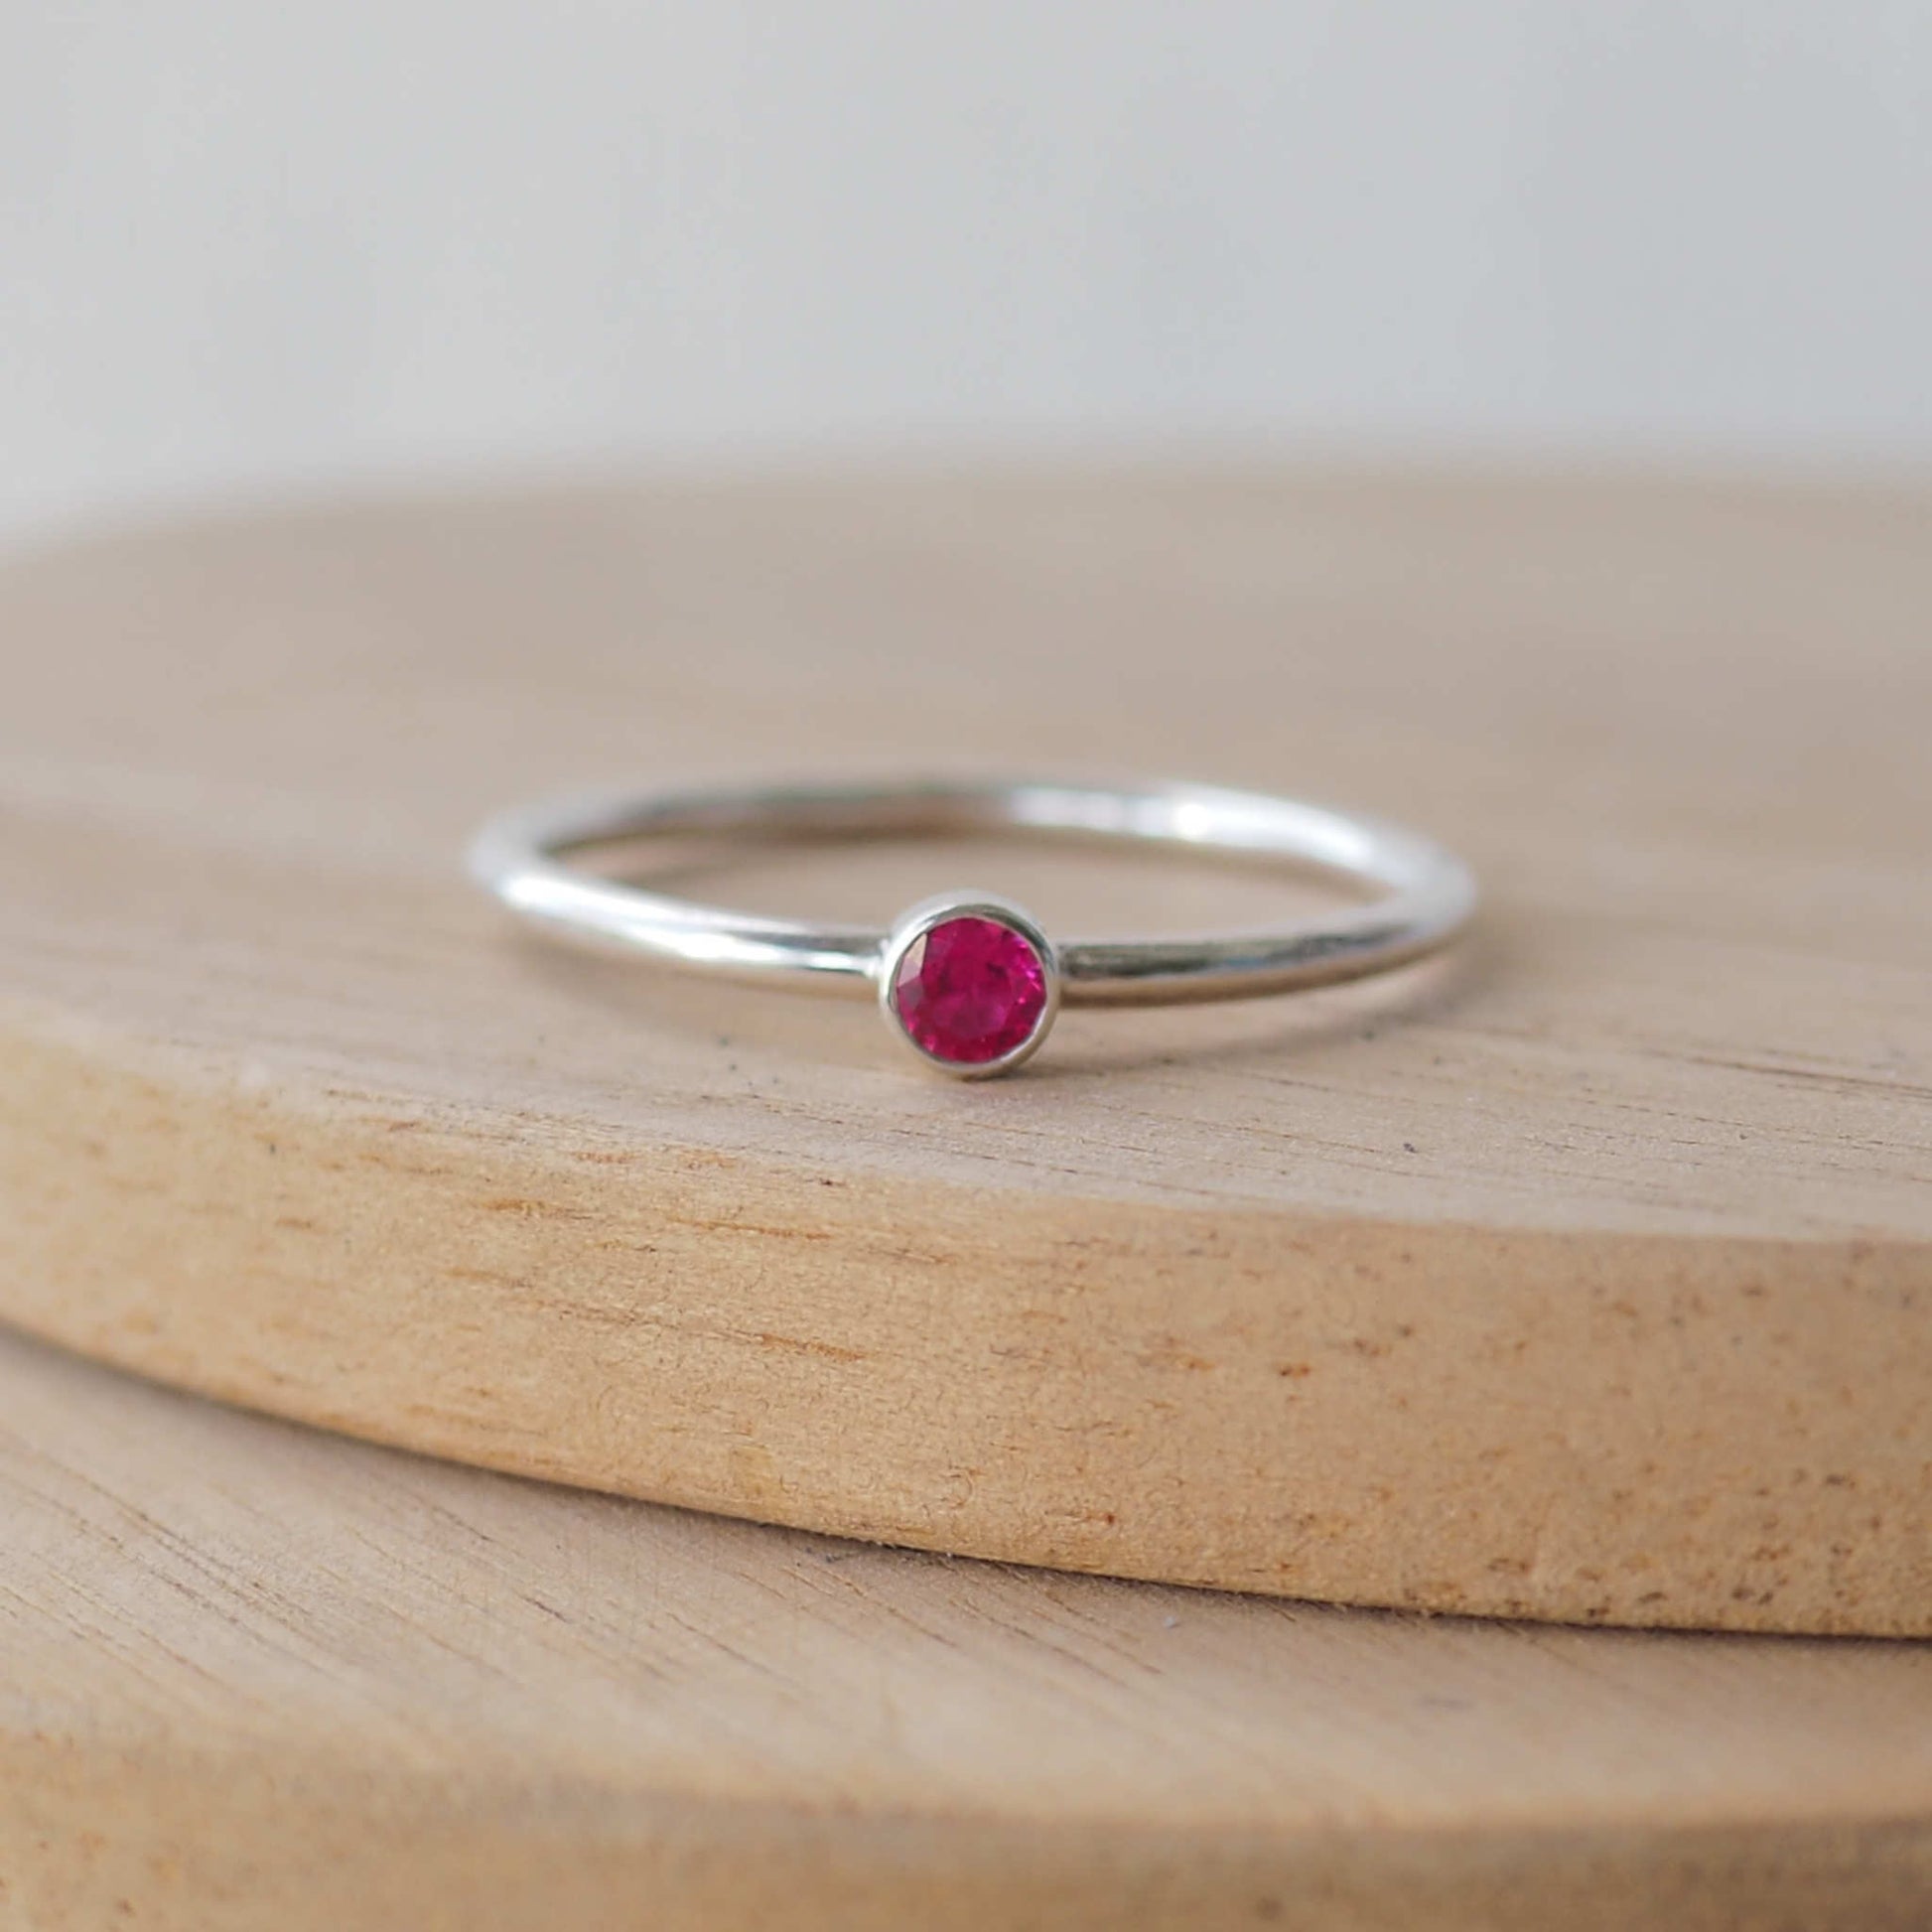 Three Silver rings, each set simply with a single cubic zirconia round 3mm gemstone  in Pink, light green and blue. Birthstones for July,August and September. The rings are Sterling Silver and made to your ring size. Handmade in Scotland by Maram Jewellery